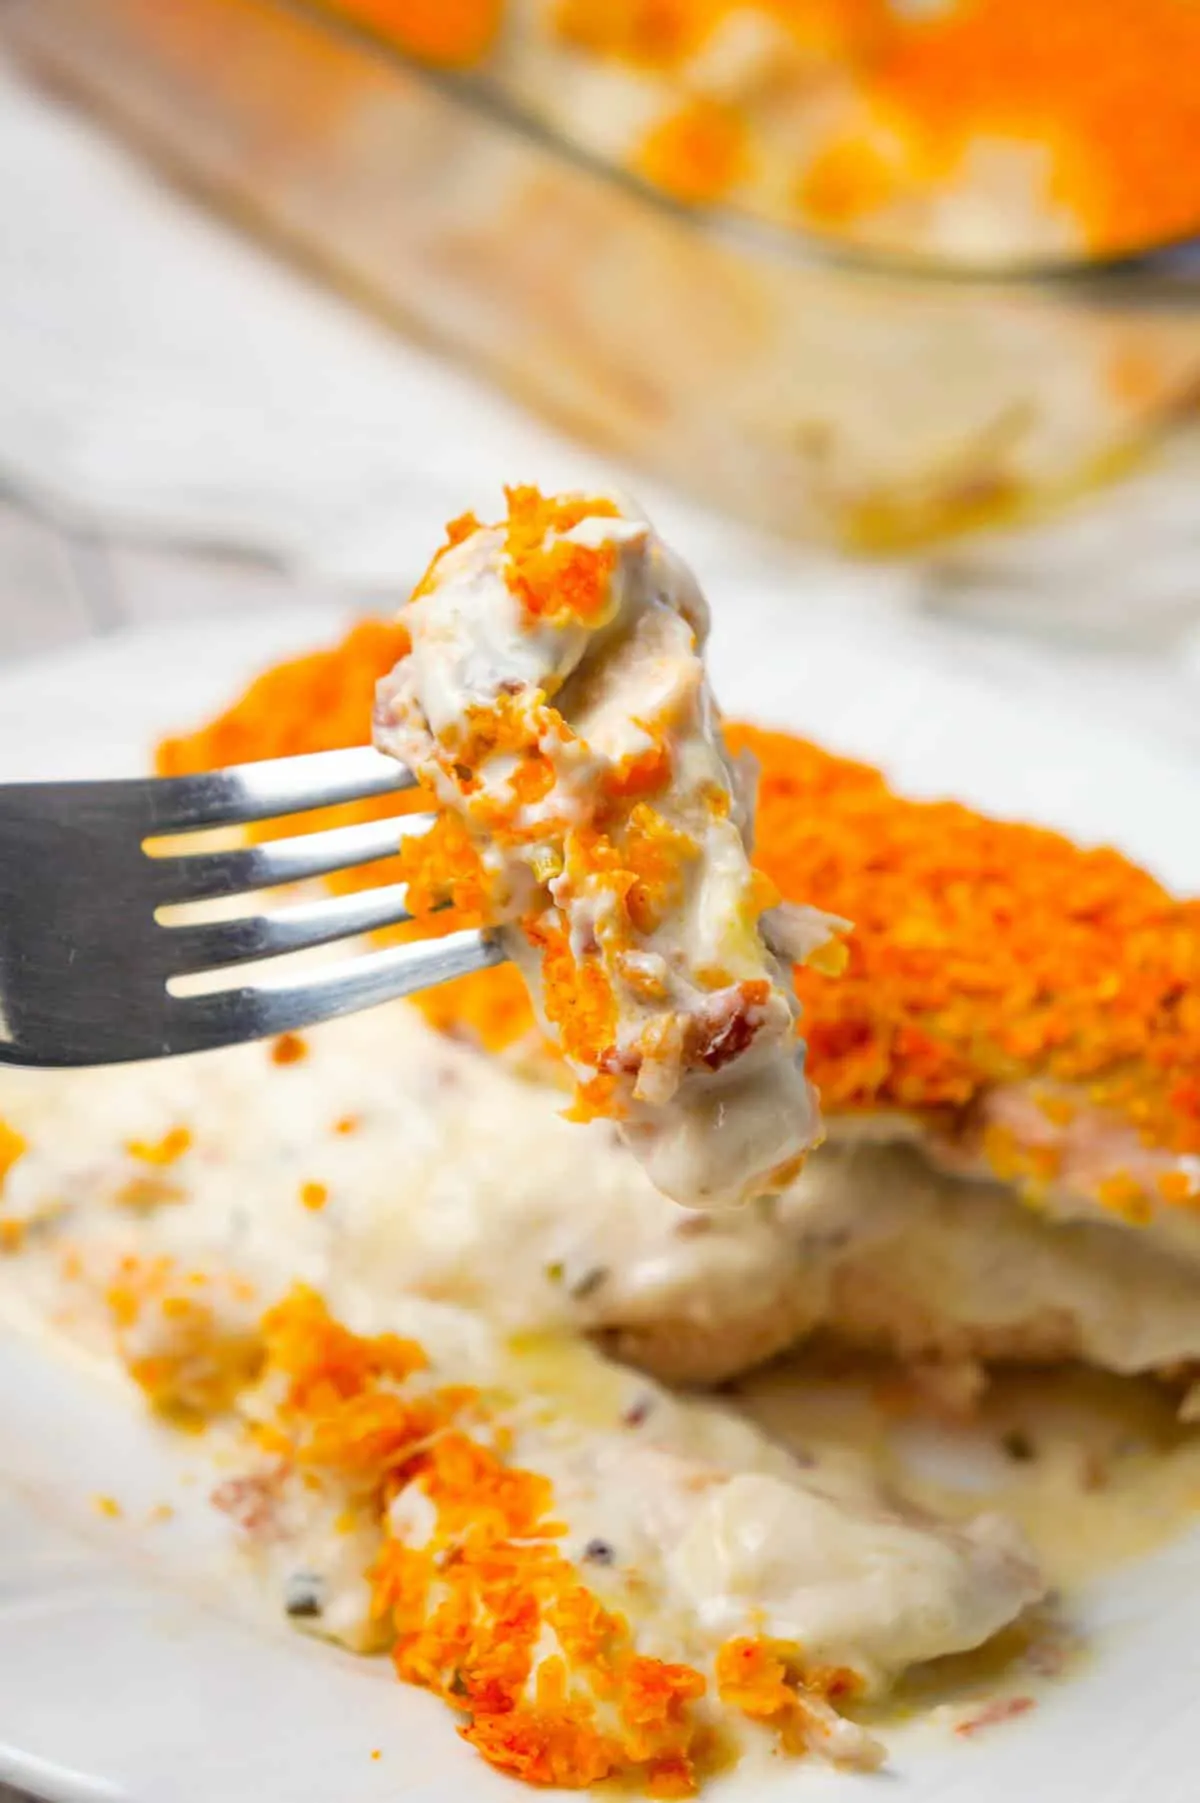 Cream Cheese and Bacon Stuffed Doritos Chicken is a delcious stuffed chicken breast recipe made with chive and onion cream cheese, cream of bacon soup, cumbled bacon and crushed Doritos.